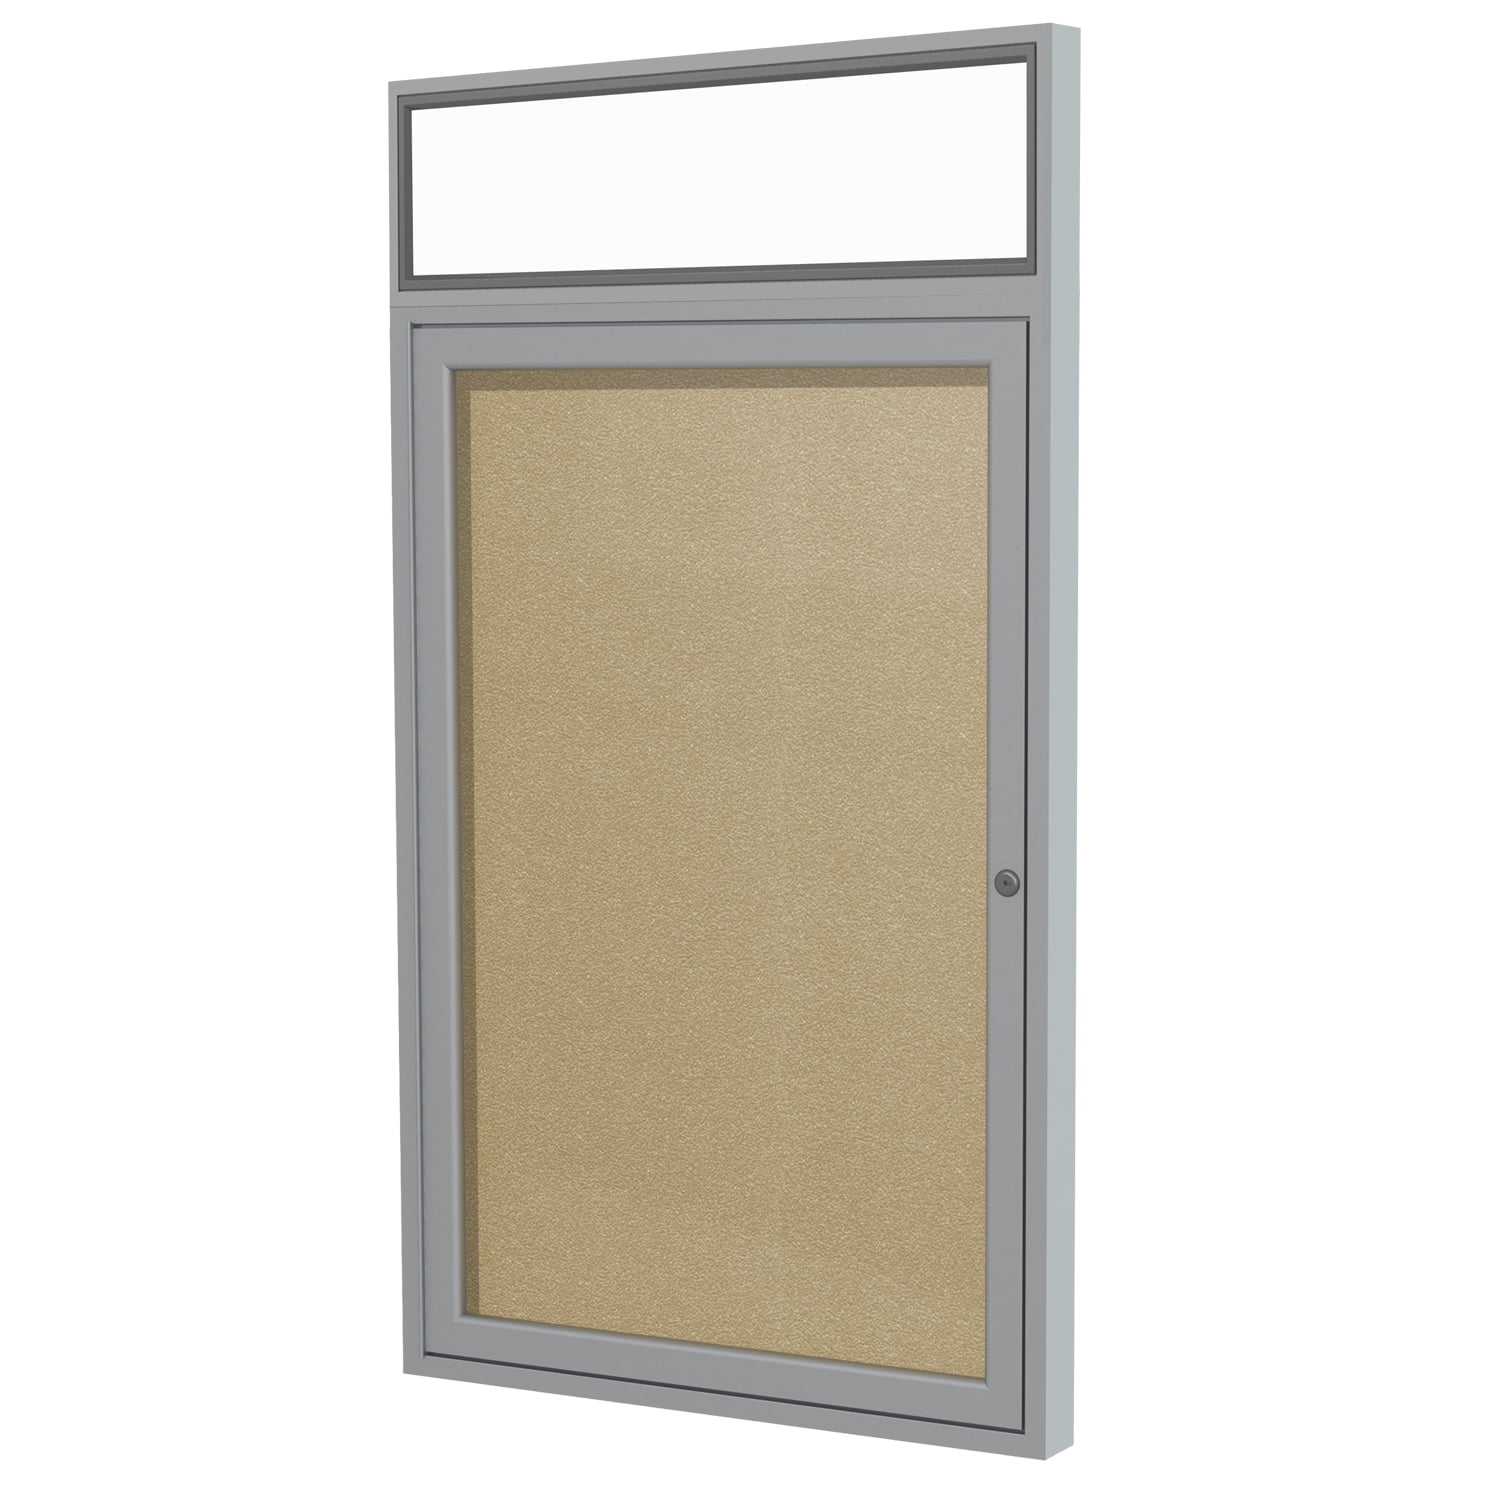 Made in the USA Ghent 3 x 2 Inches Outdoor Bronze Frame with Illuminated Headliner Enclosed Vinyl Bulletin Board Ebony 